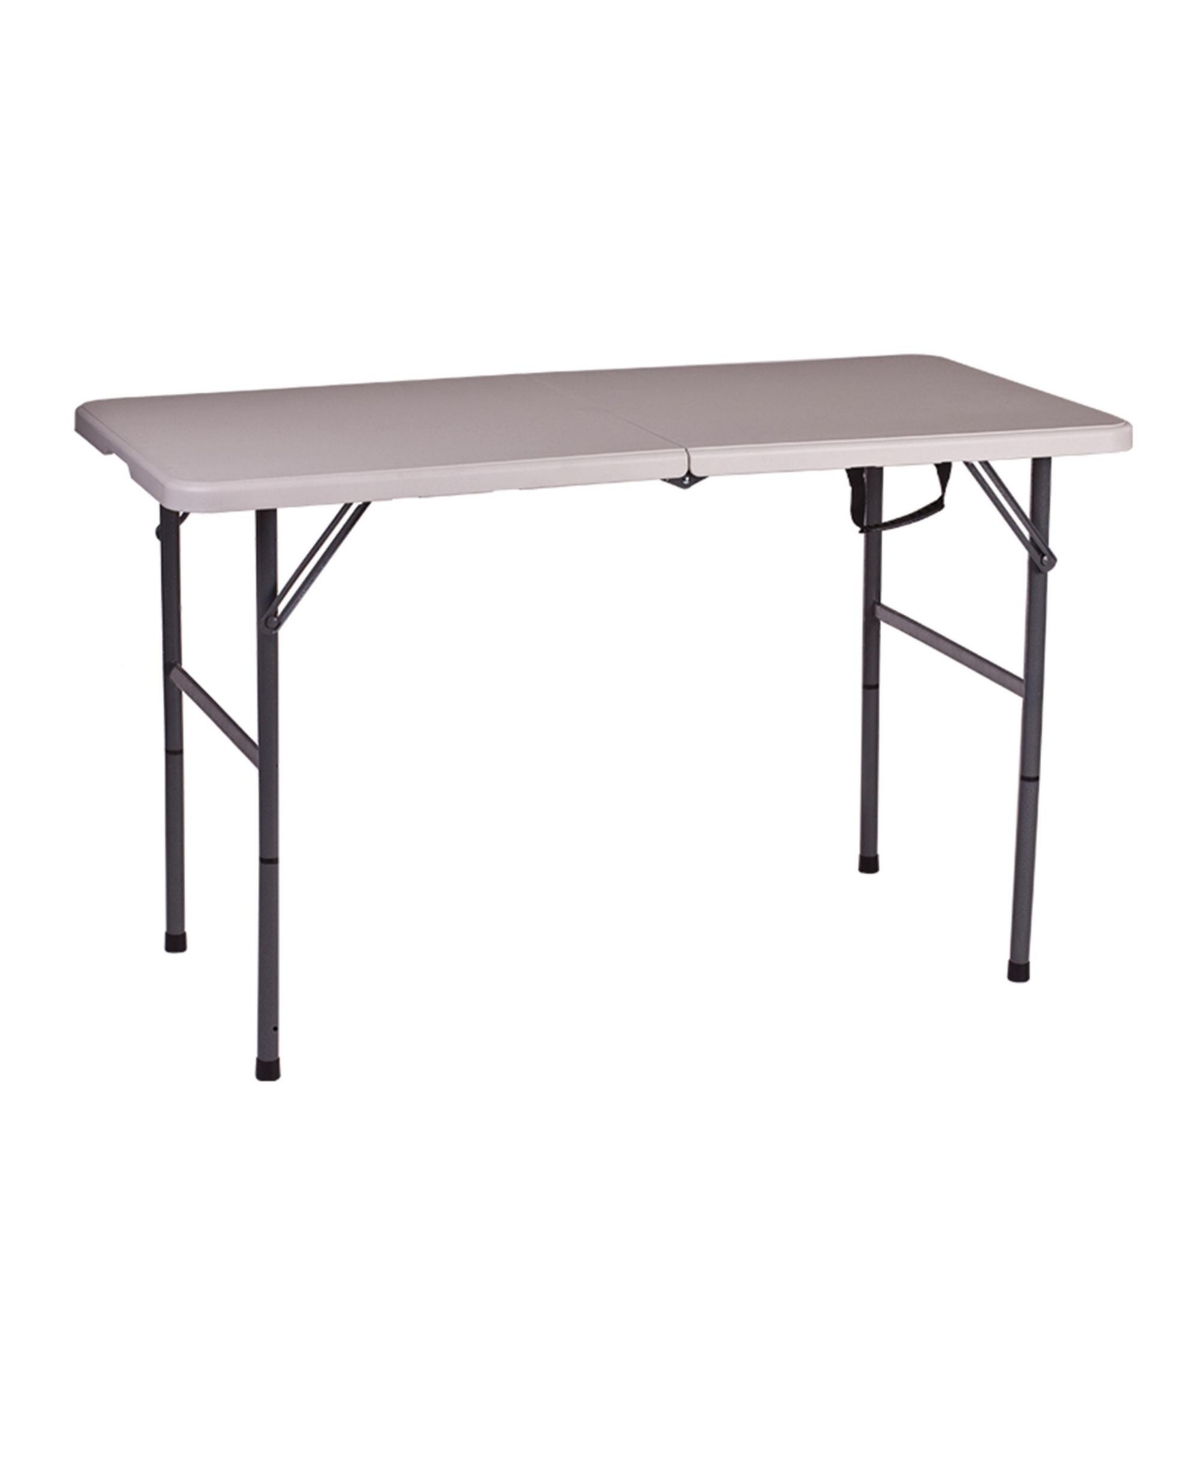 Stan sport Folding Camp Table with Adjustable Legs - White